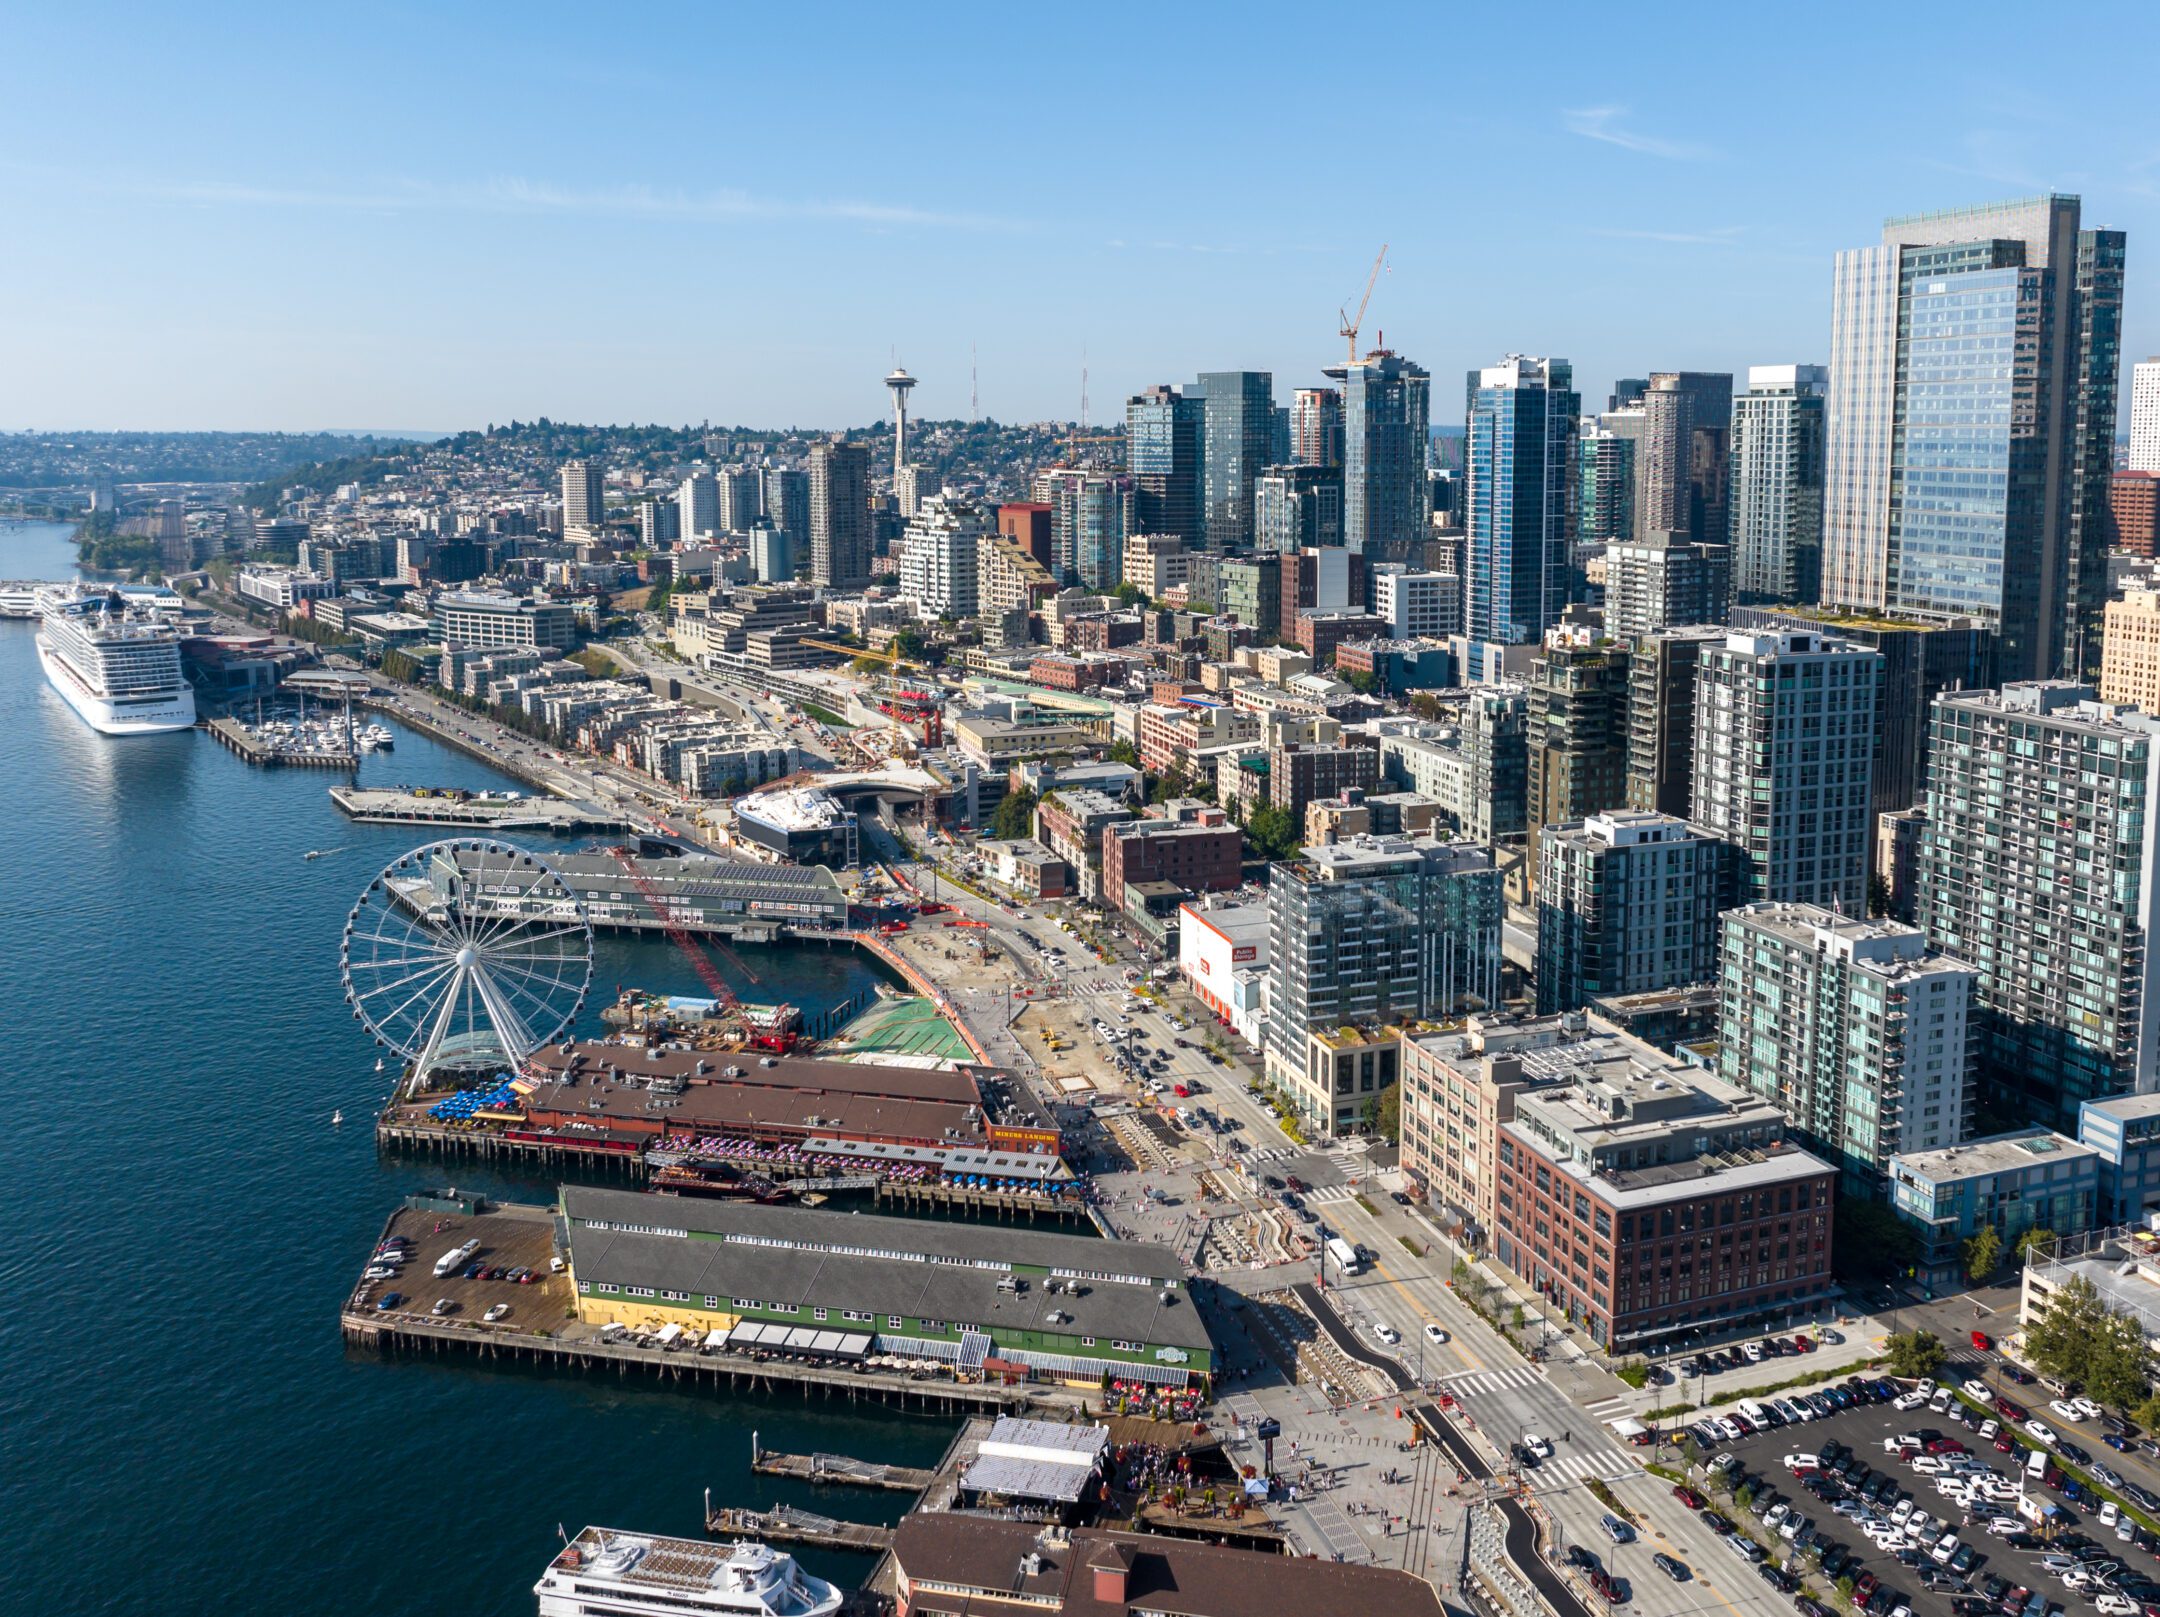 An aerial photograph of the Seattle Waterfront featuring Pier 56, Miner's Landing, and the Seattle Great Wheel on the left, and Downtown Seattle to the right.